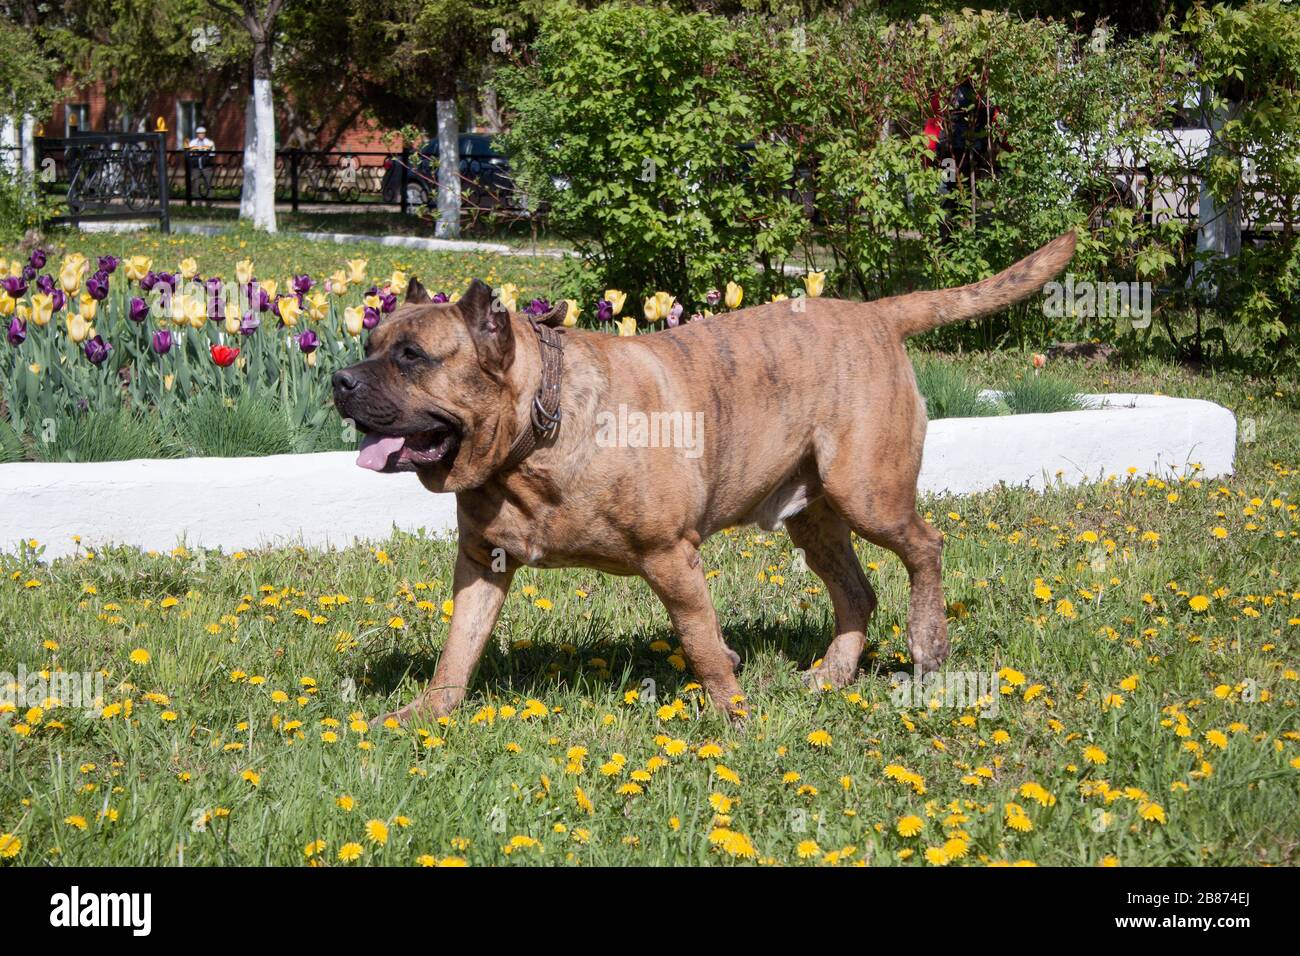 Canary mastiff is running on a green meadow. Canarian molosser or dogo canario. Pet animals. Stock Photo